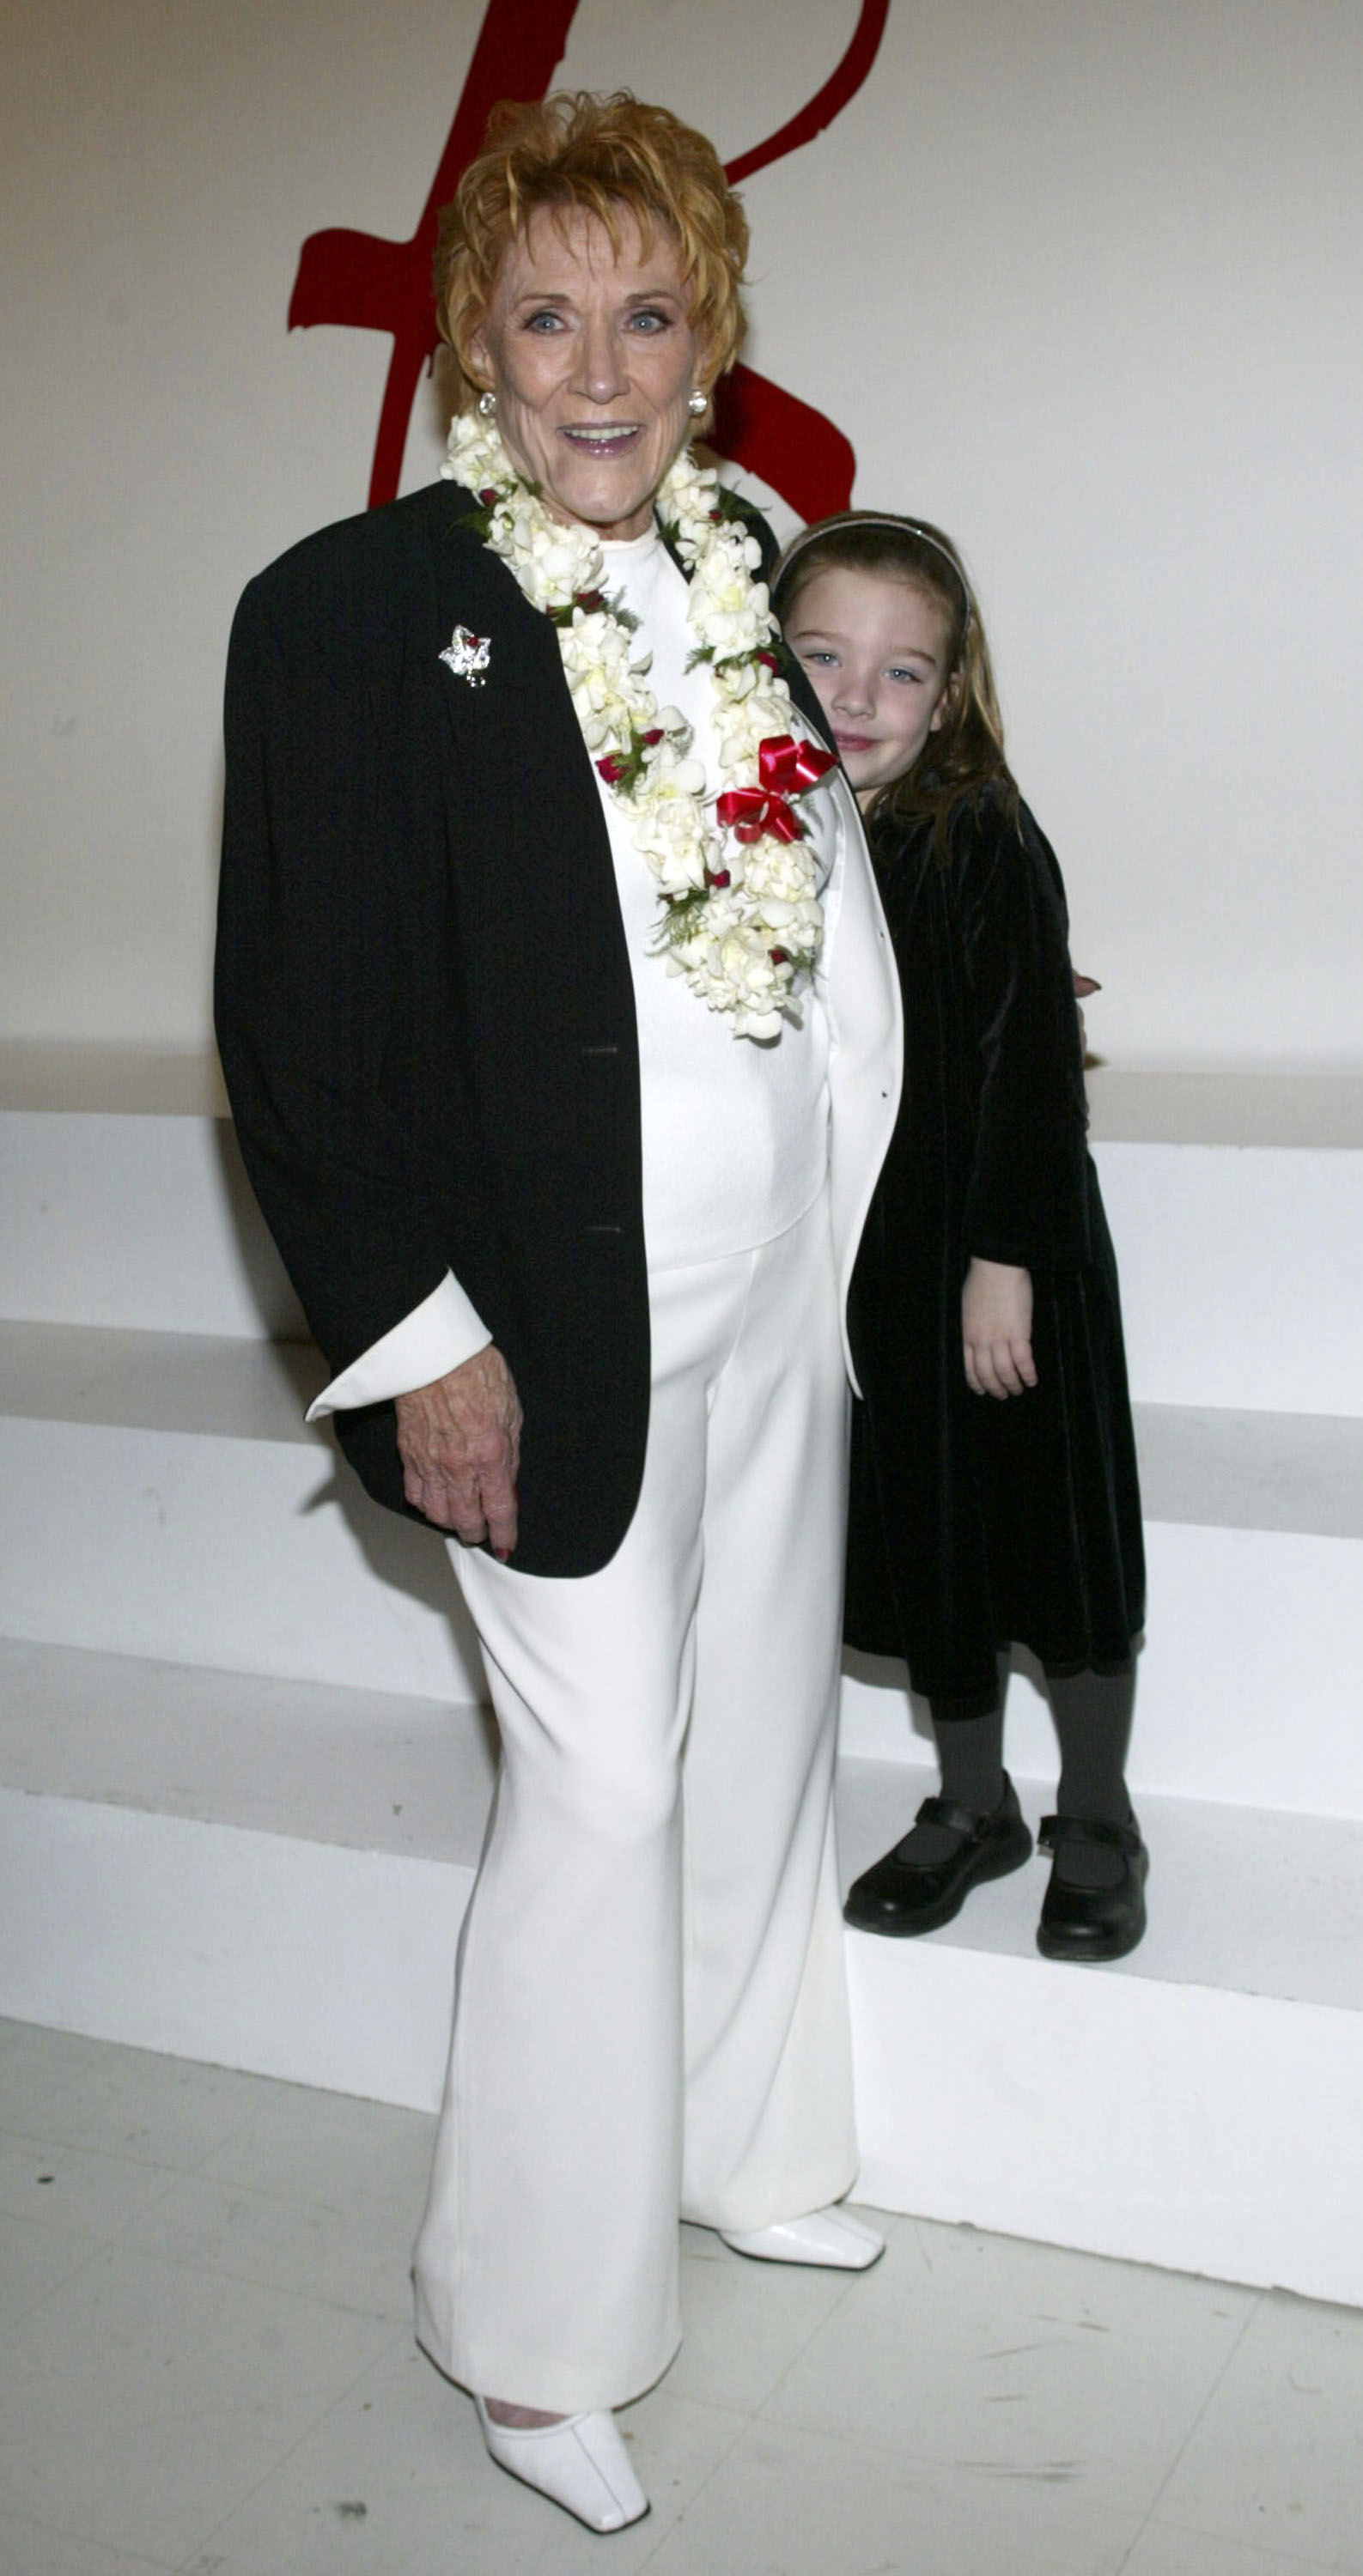 Jeanne Cooper and her granddaughter Sarah Wilson at the "The Young and the Restless" celebration for actress Jeanne Cooper's 30th year anniversary on the show at CBS Television City on January 28, 2004 in Los Angeles, California | Source: Getty Images